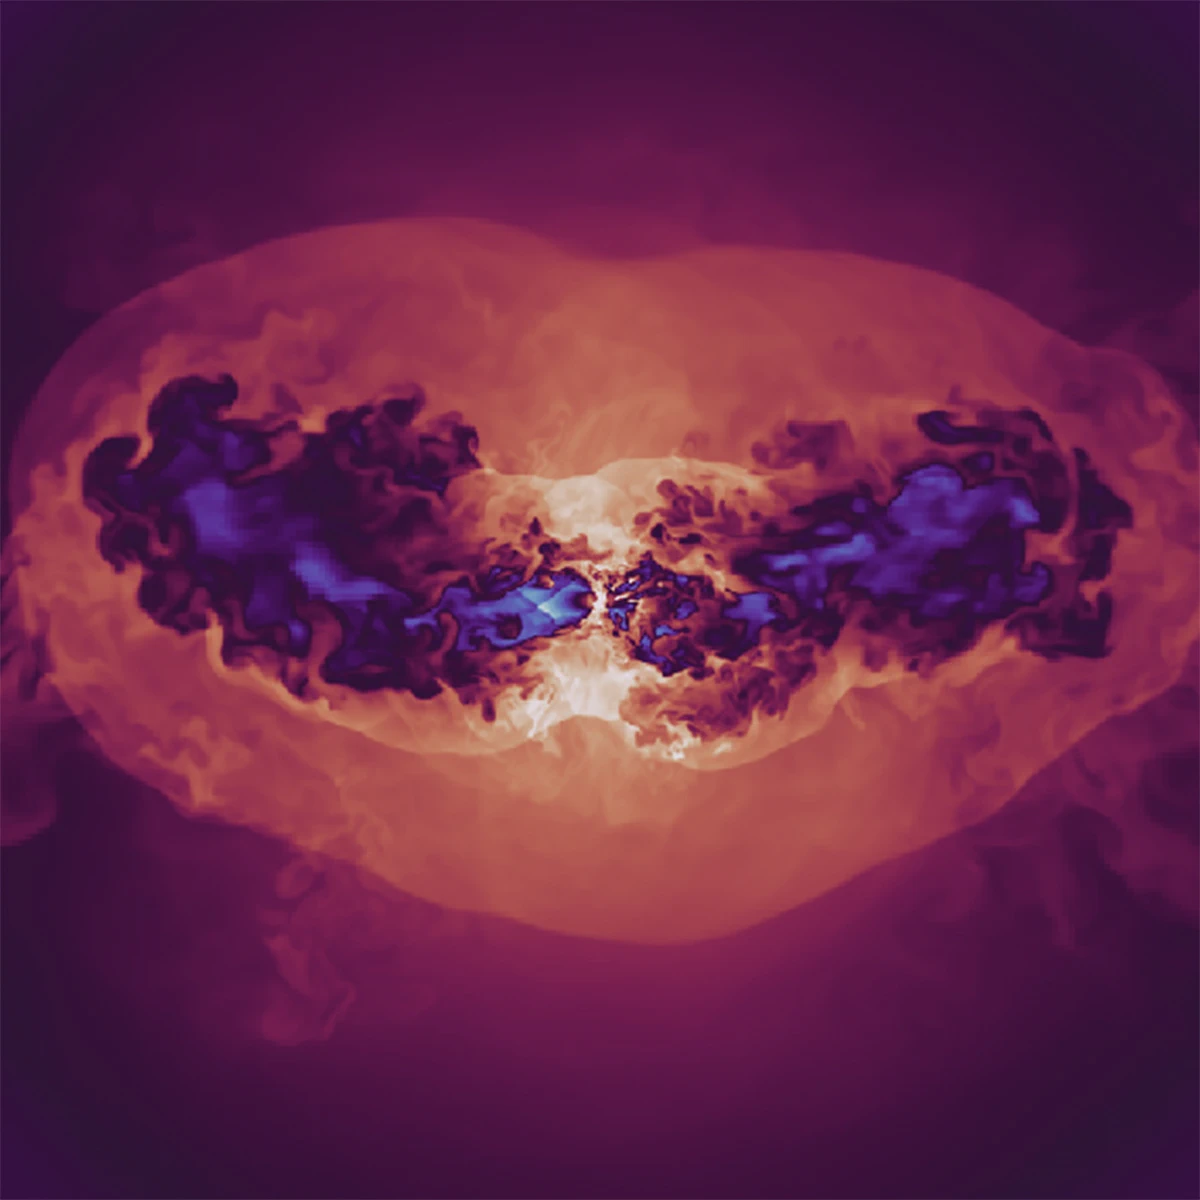 A computer simulation of a galaxy shows blueish-purple structures that look like clouds streaming from a central black hole. These are high-energy jets that stir up the plasma atmosphere permeating the galaxy, shown in shades of yellow, orange and red.